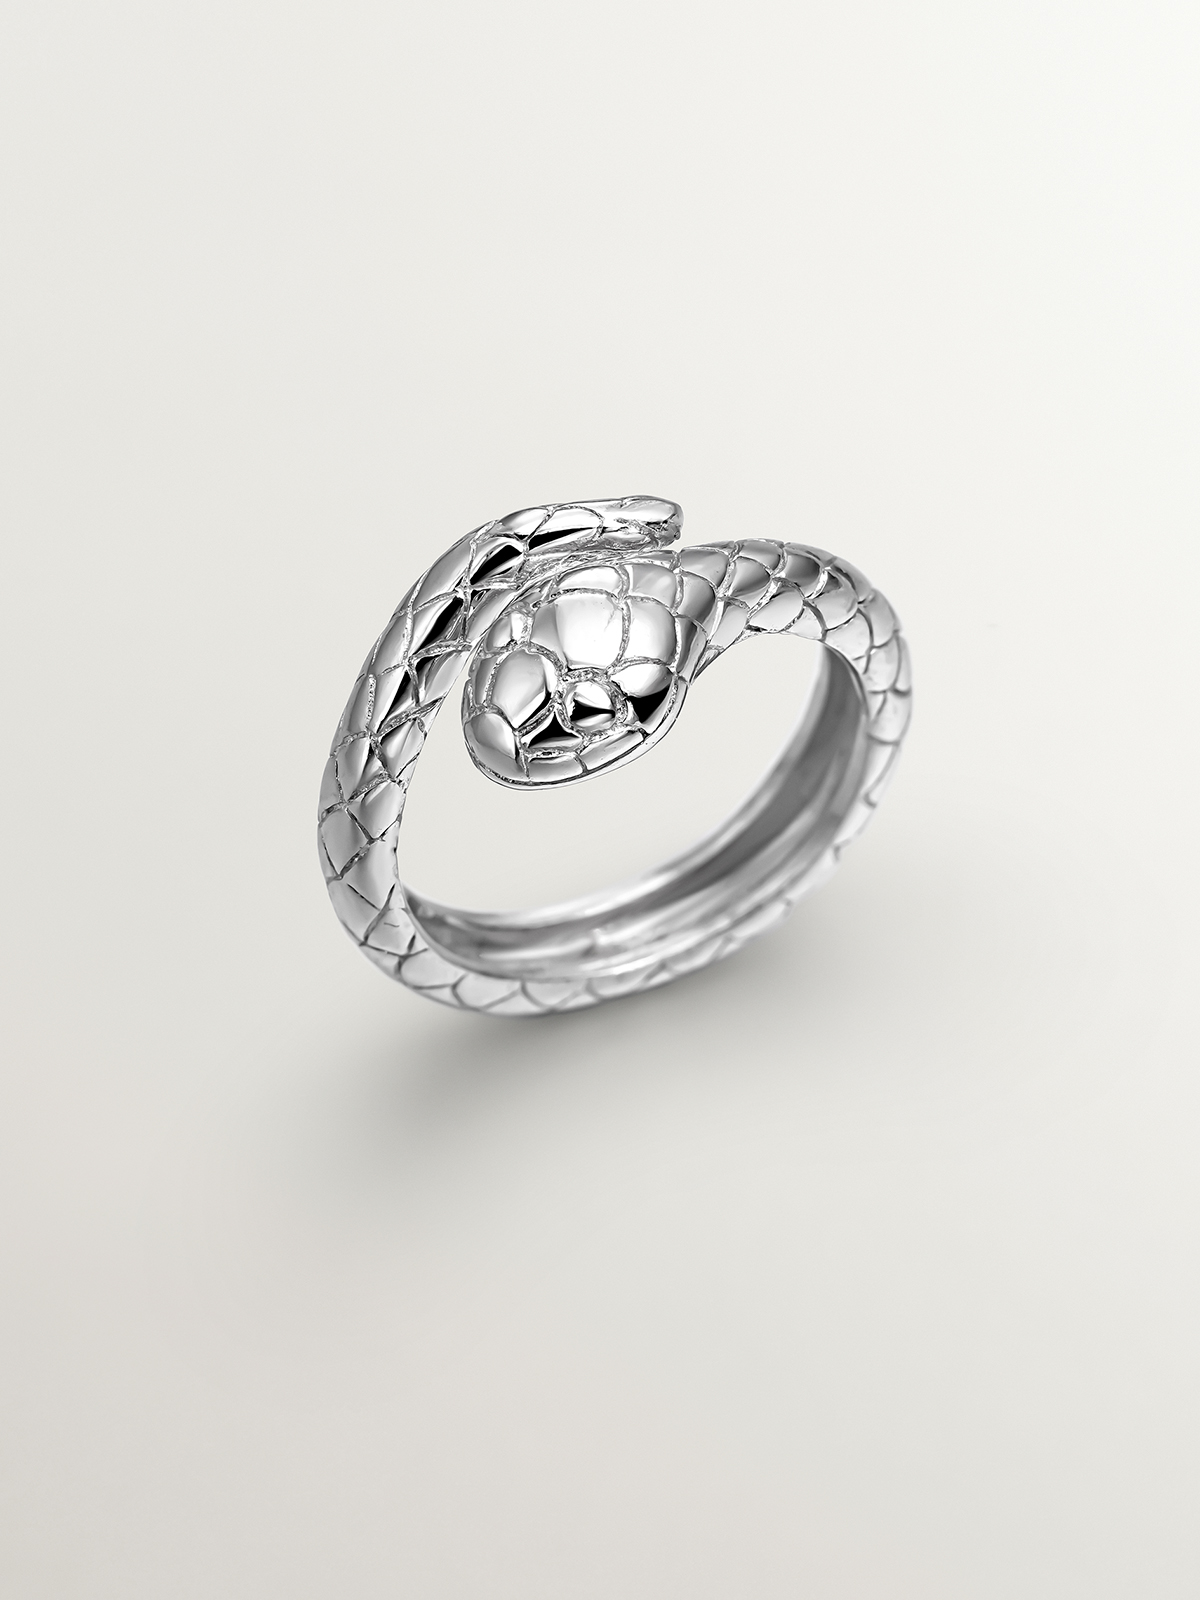 925 Silver Ring with Snake Design